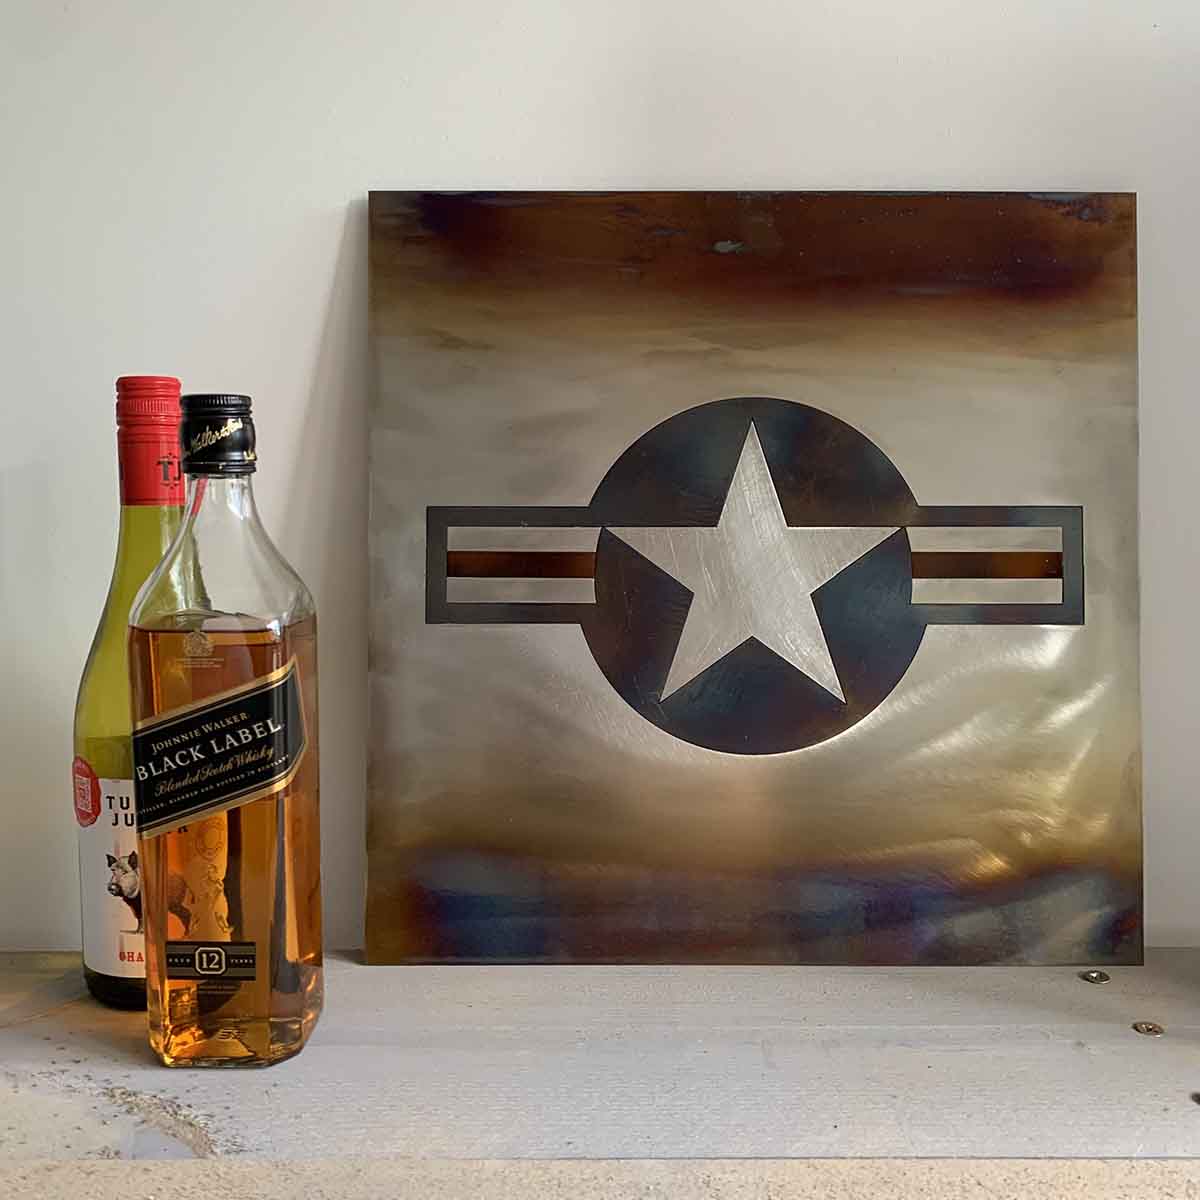 United States Air Force steel roundel artwork next to some bottles on a shelf.